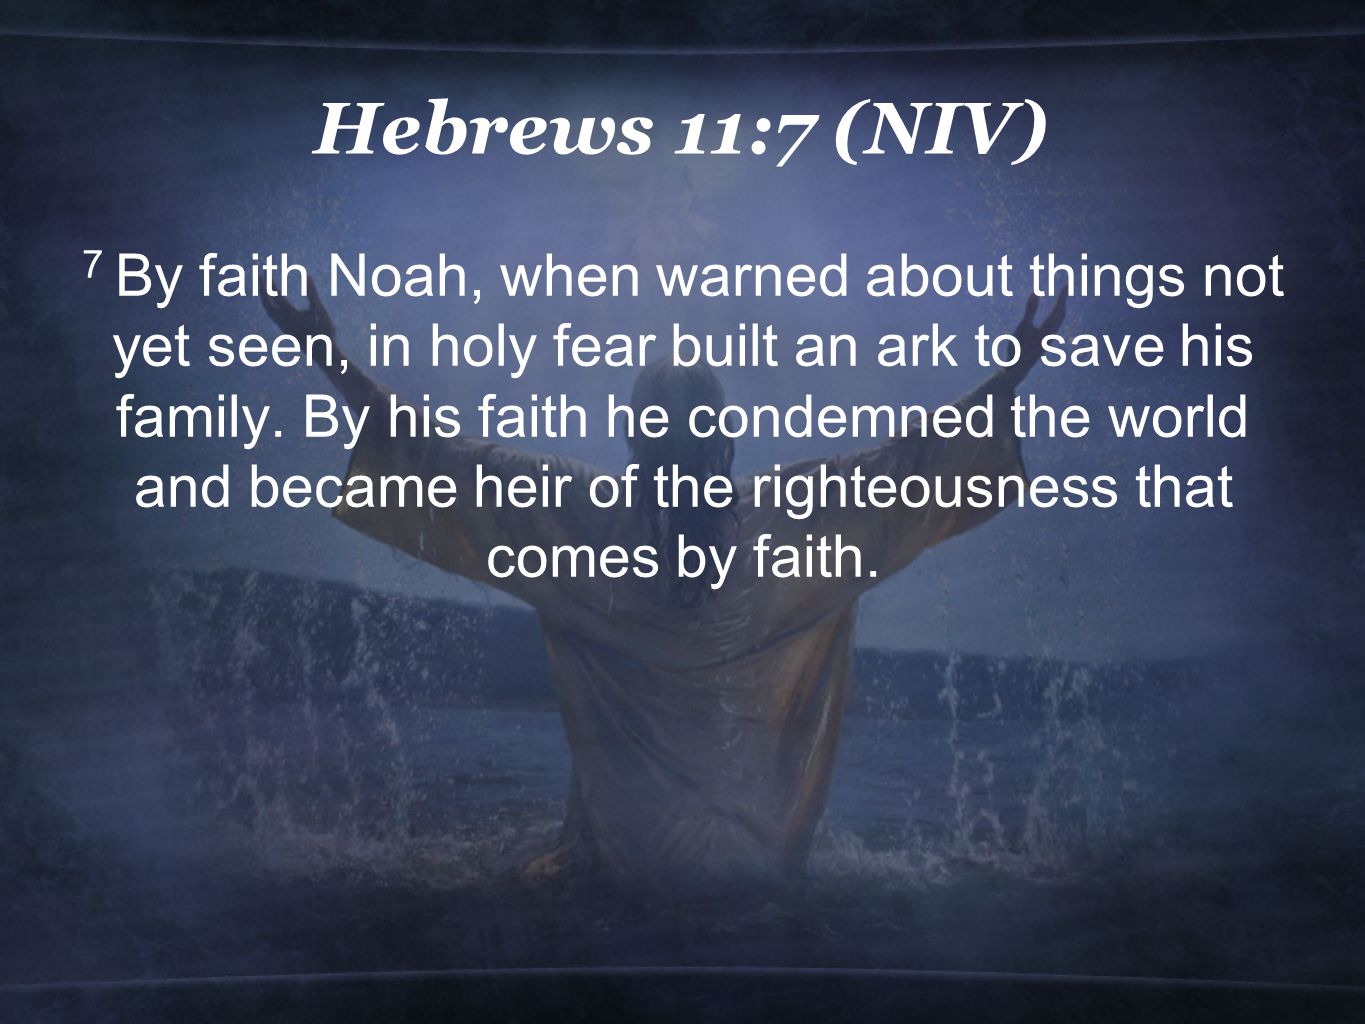 Hebrews 11:7 (NIV) 7 By faith Noah, when warned about things not yet seen, in holy fear built an ark to save his family.